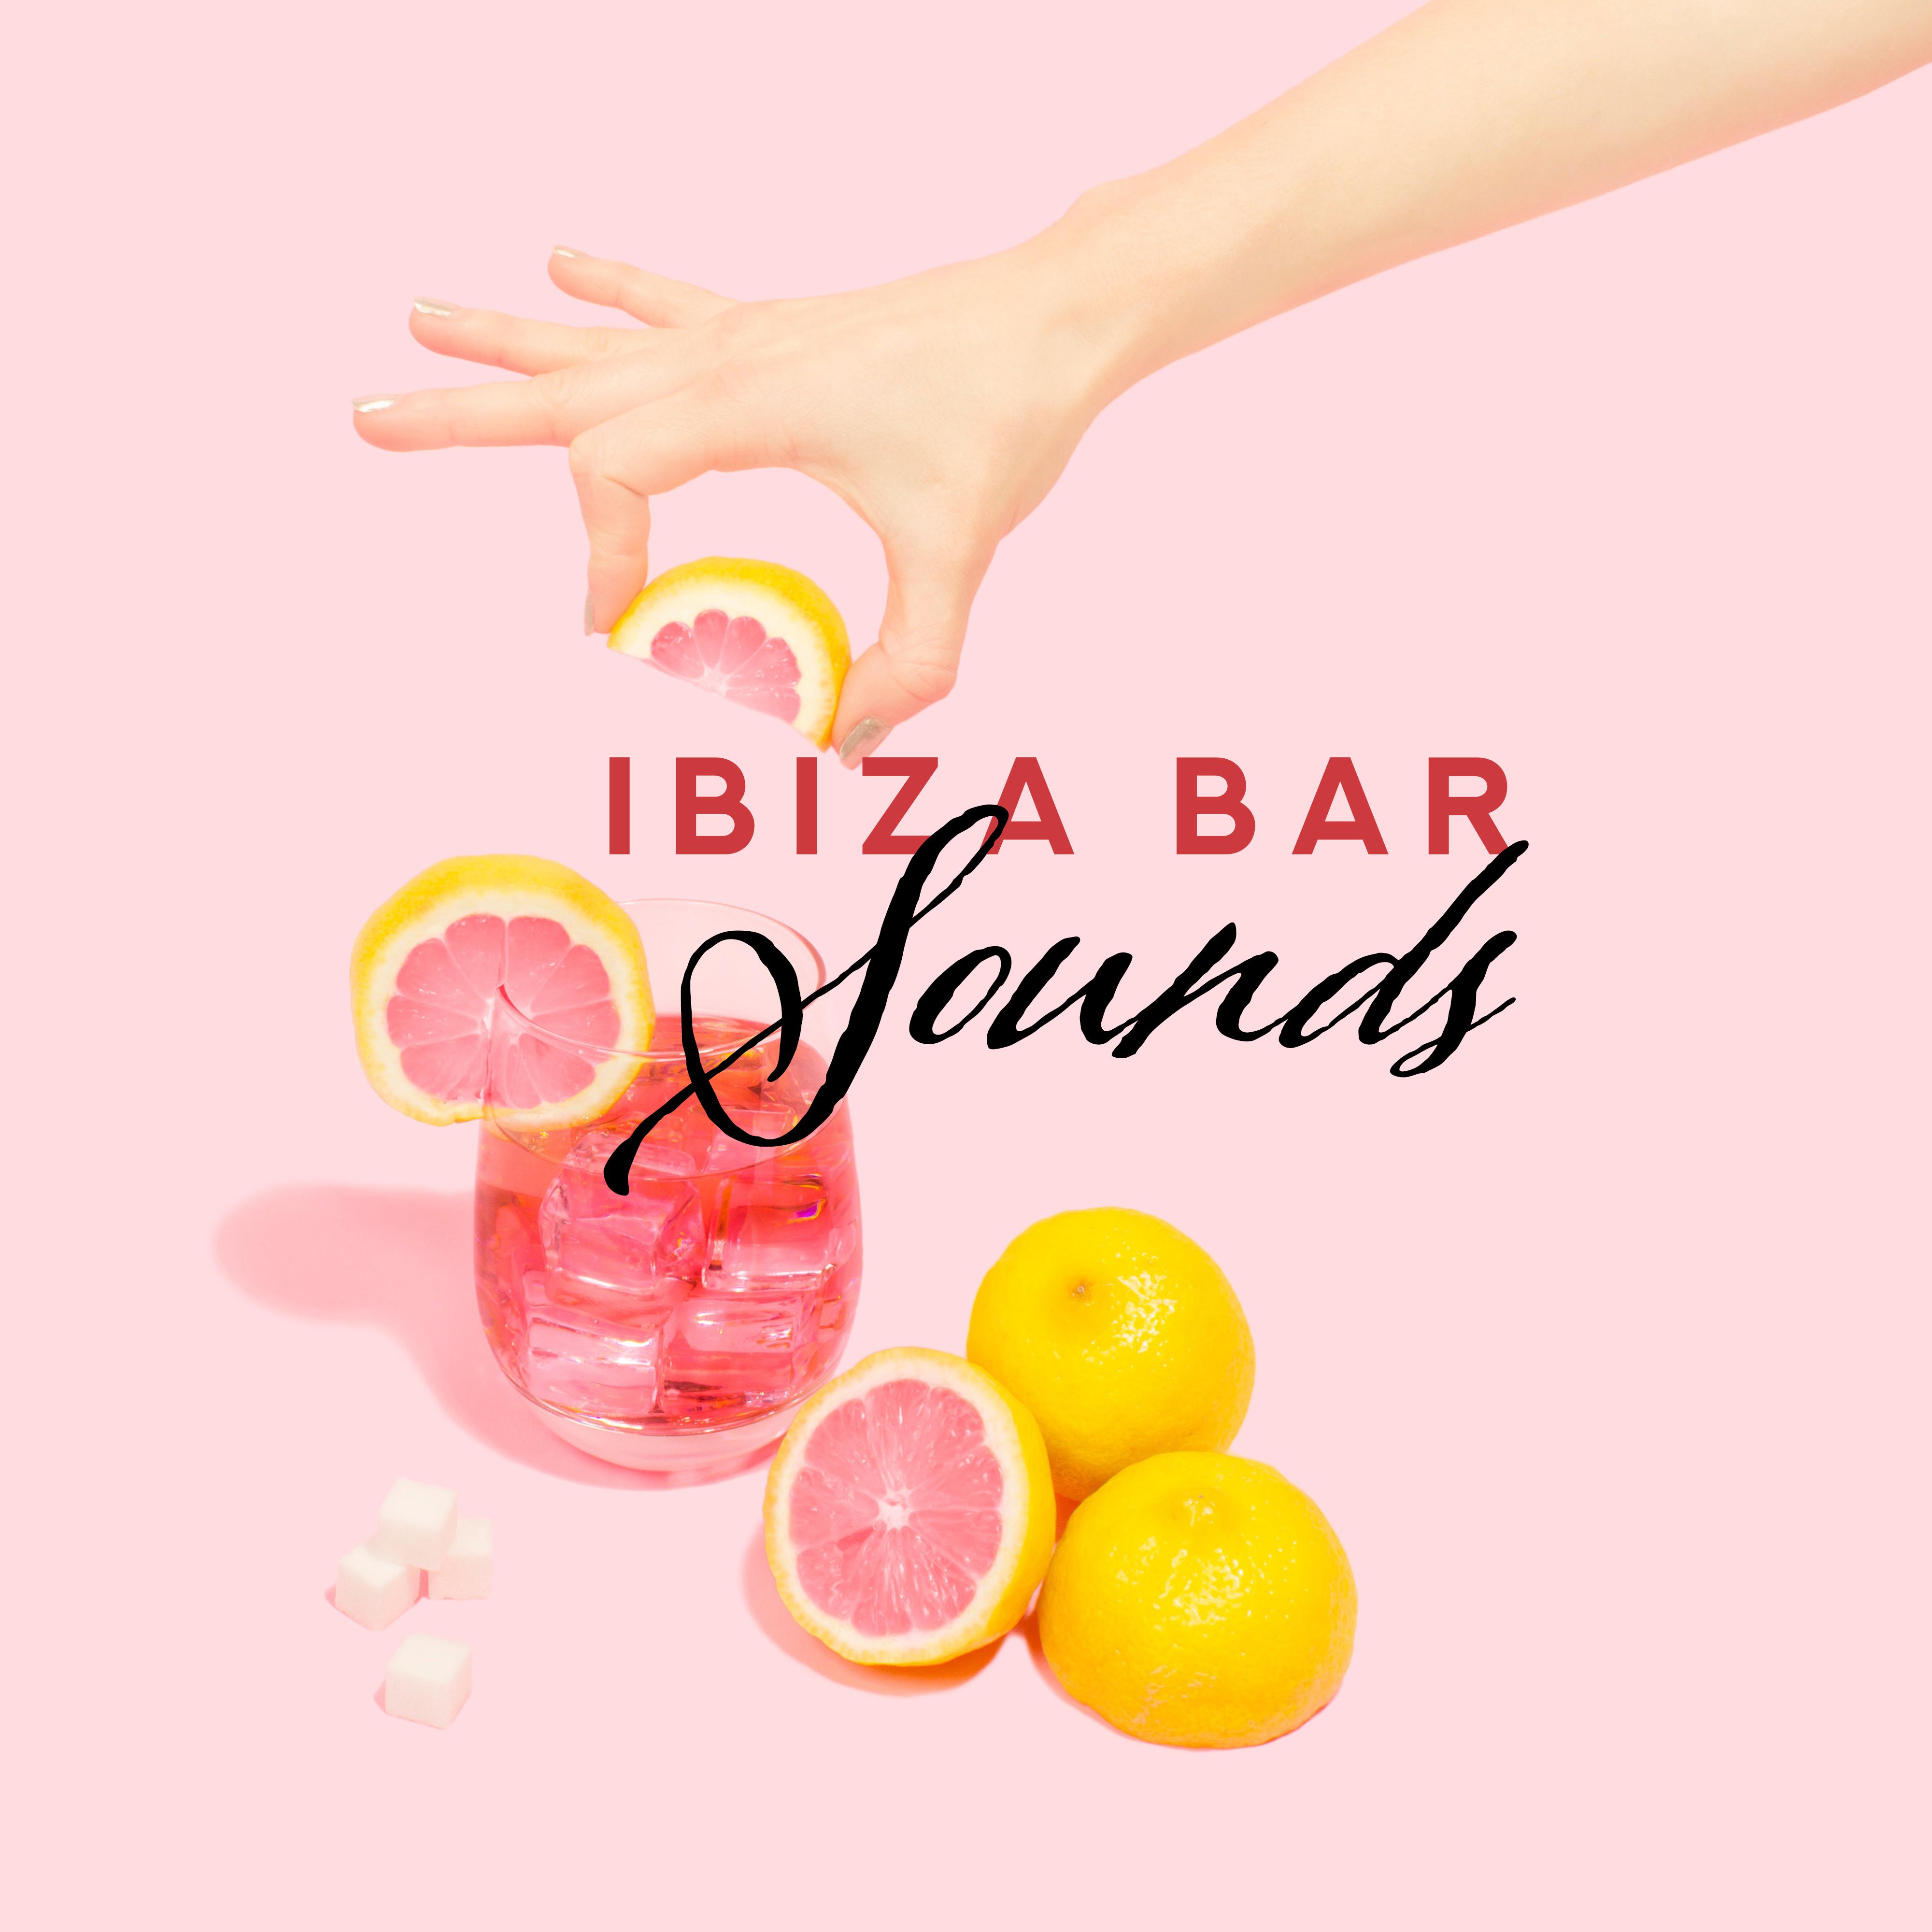 Ibiza Bar Sounds – Ibiza Chill Out, Summer Music, Relaxing Vibes, Relax, Tropical Chillout Party, Sunny Chillout Lounge